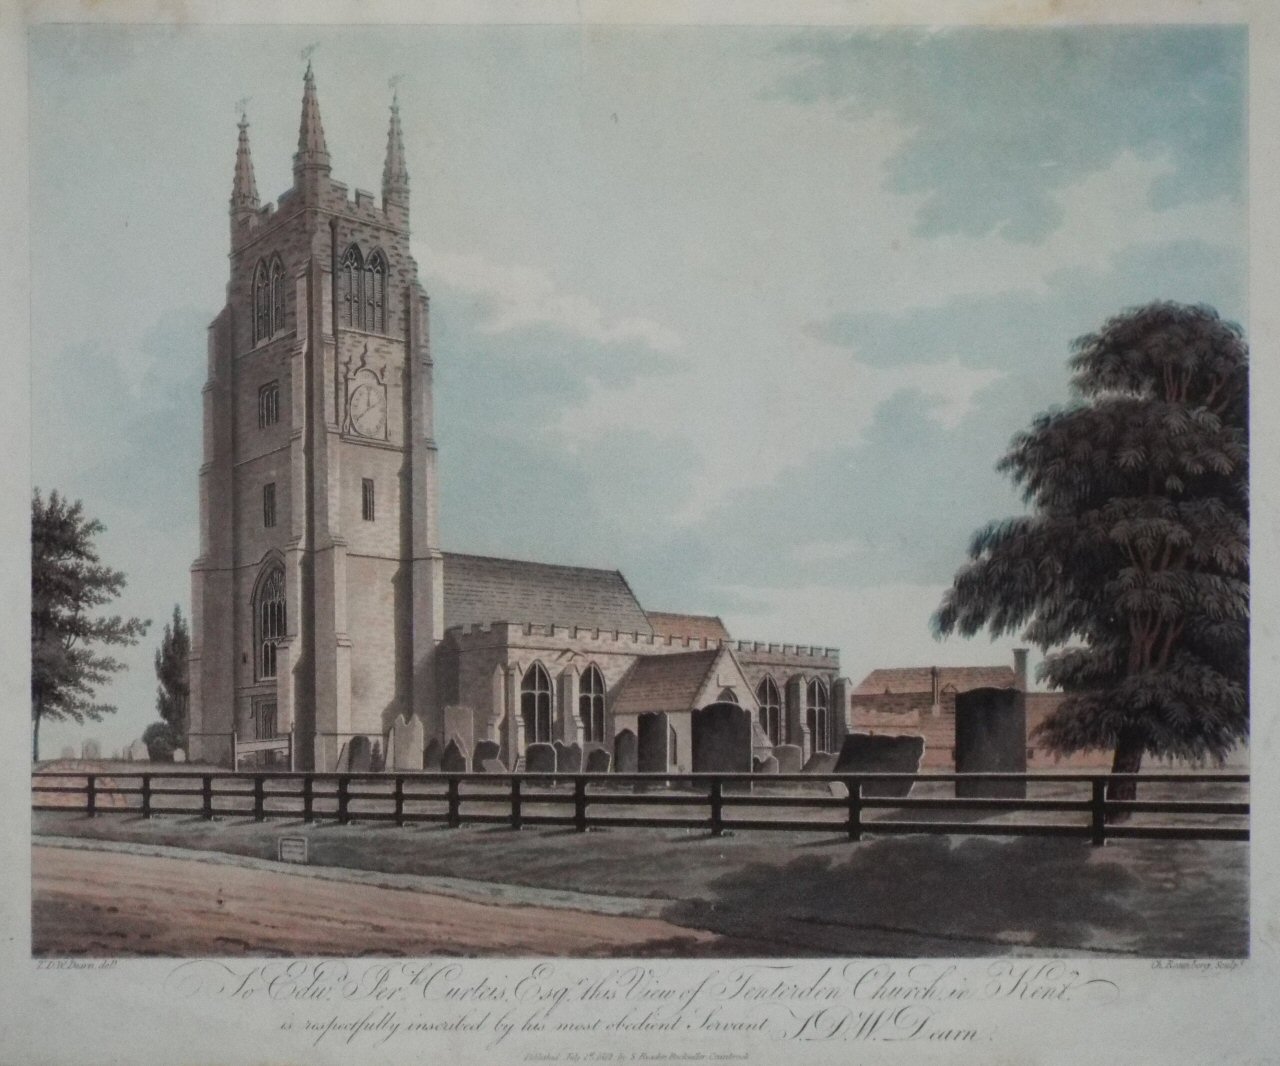 Aquatint - To Edwd. Perh. Cureis Esqr. this View of Tenterden Church, in Kent, is respectfully inscribed by his most obedient Servant, T. D. W. Dearn. - Rosenberg